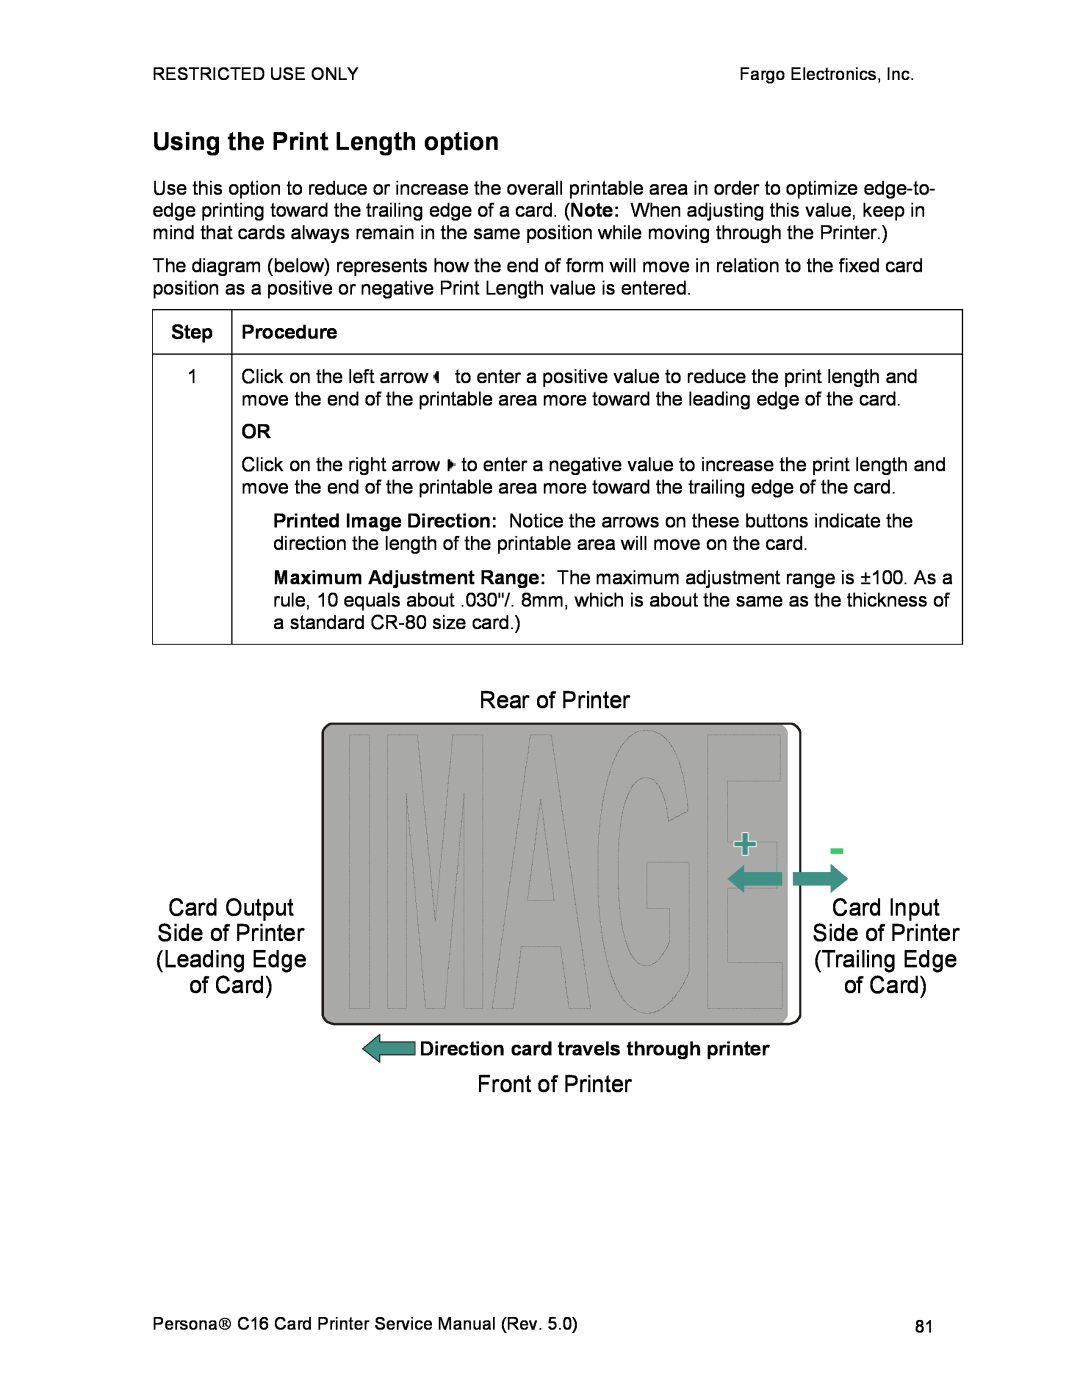 FARGO electronic C16 service manual Using the Print Length option, Rear of Printer, Front of Printer 